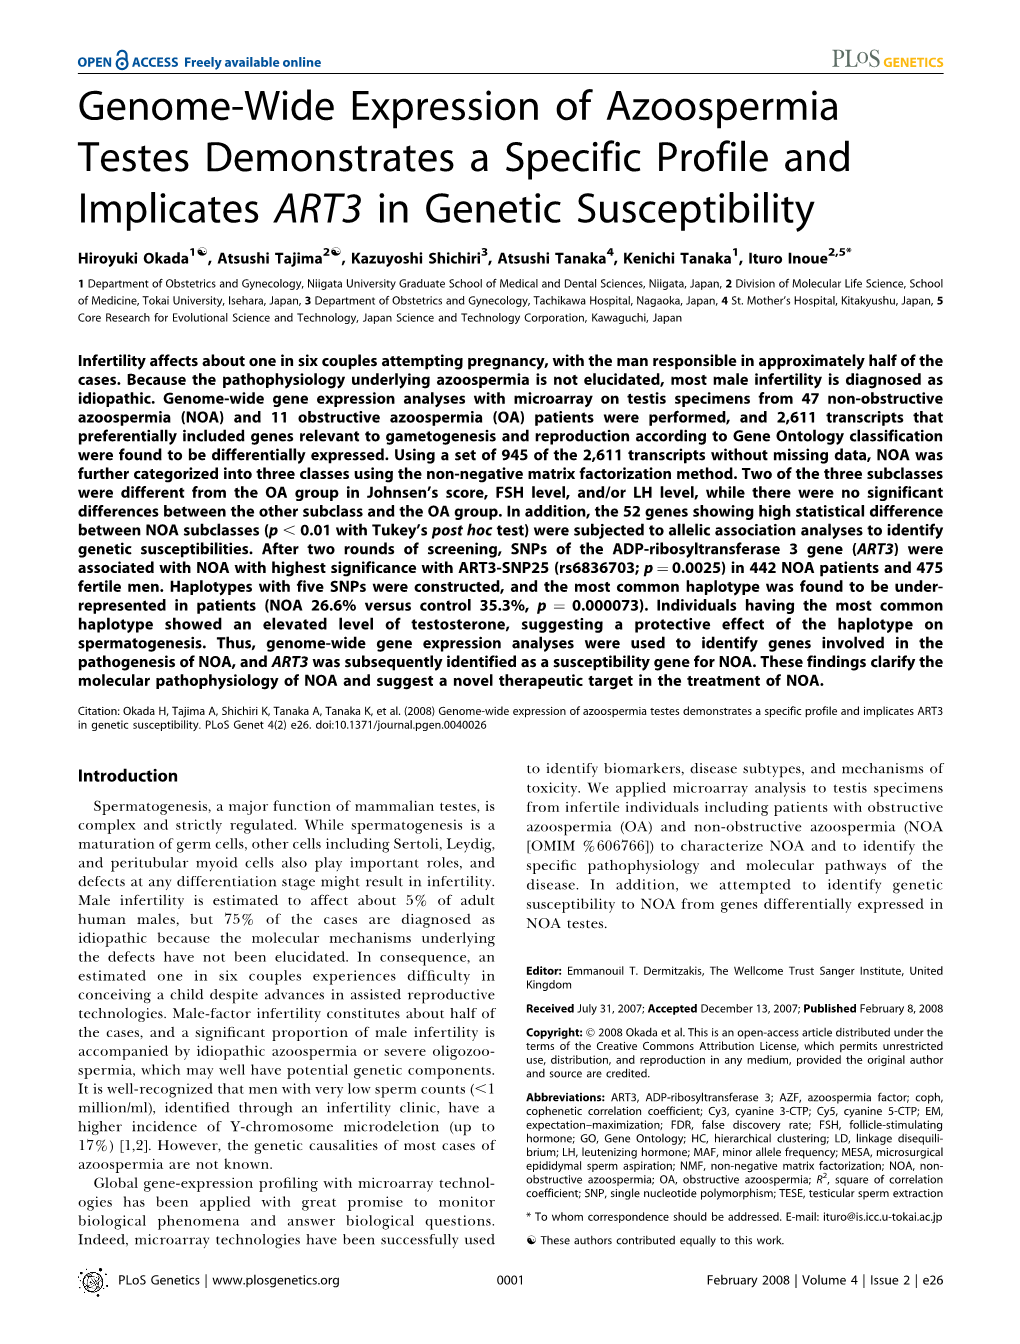 Genome-Wide Expression of Azoospermia Testes Demonstrates a Specific Profile and Implicates ART3 in Genetic Susceptibility